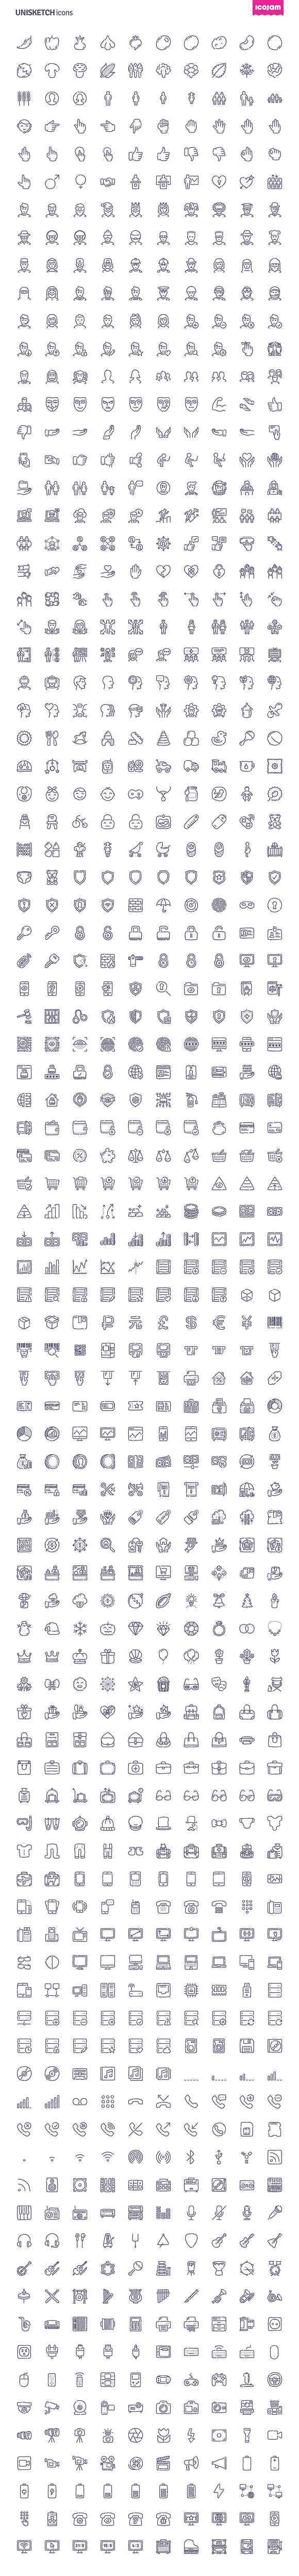 3000 Unisketch hand drawn icons in Birthday Icons - product preview 2